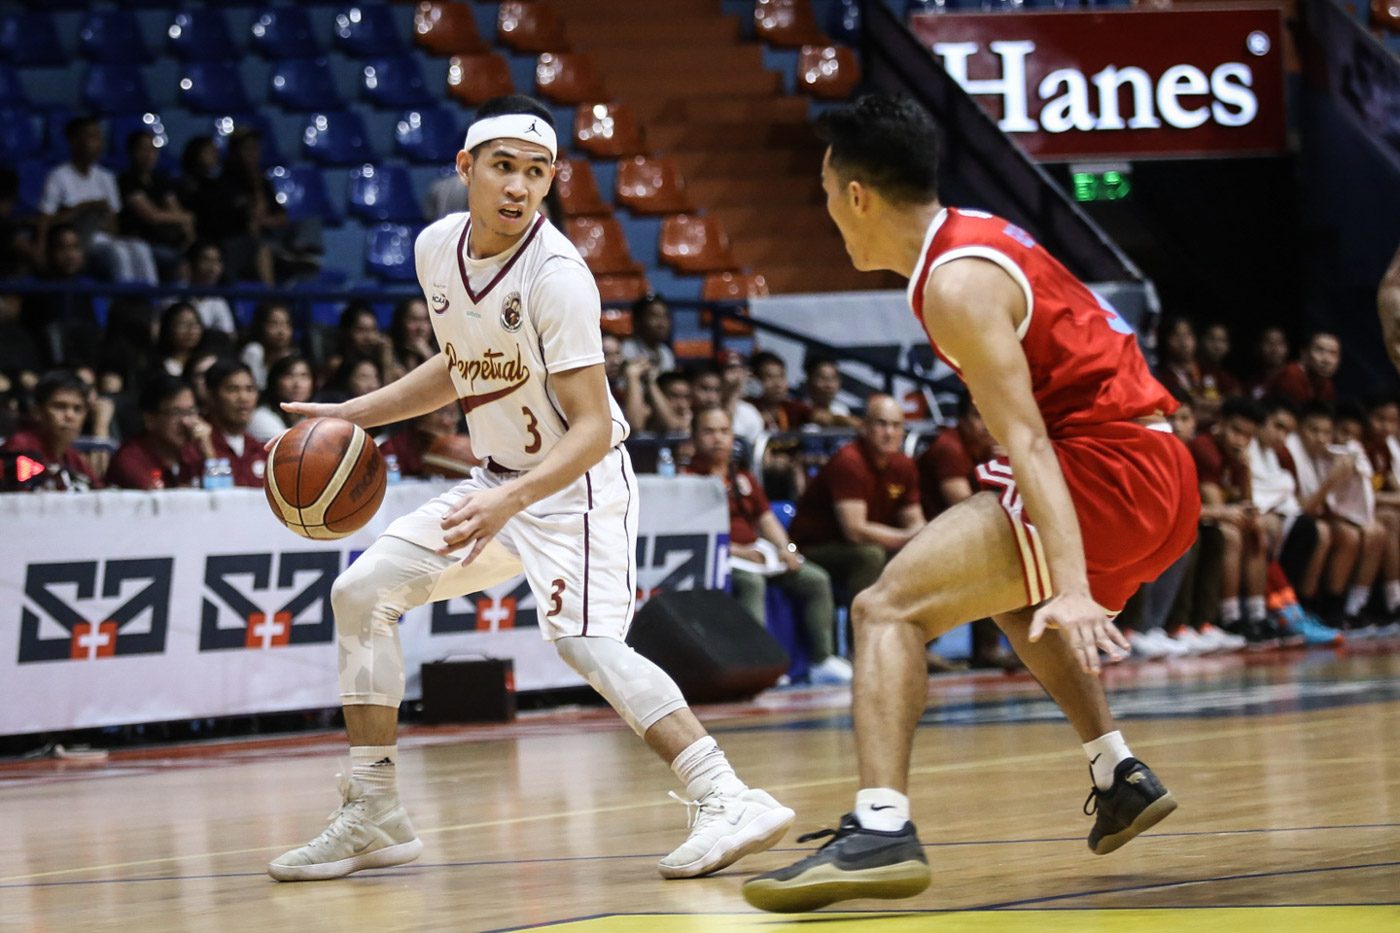 Perpetual Altas get away with warning after NCAA eligibility complaint